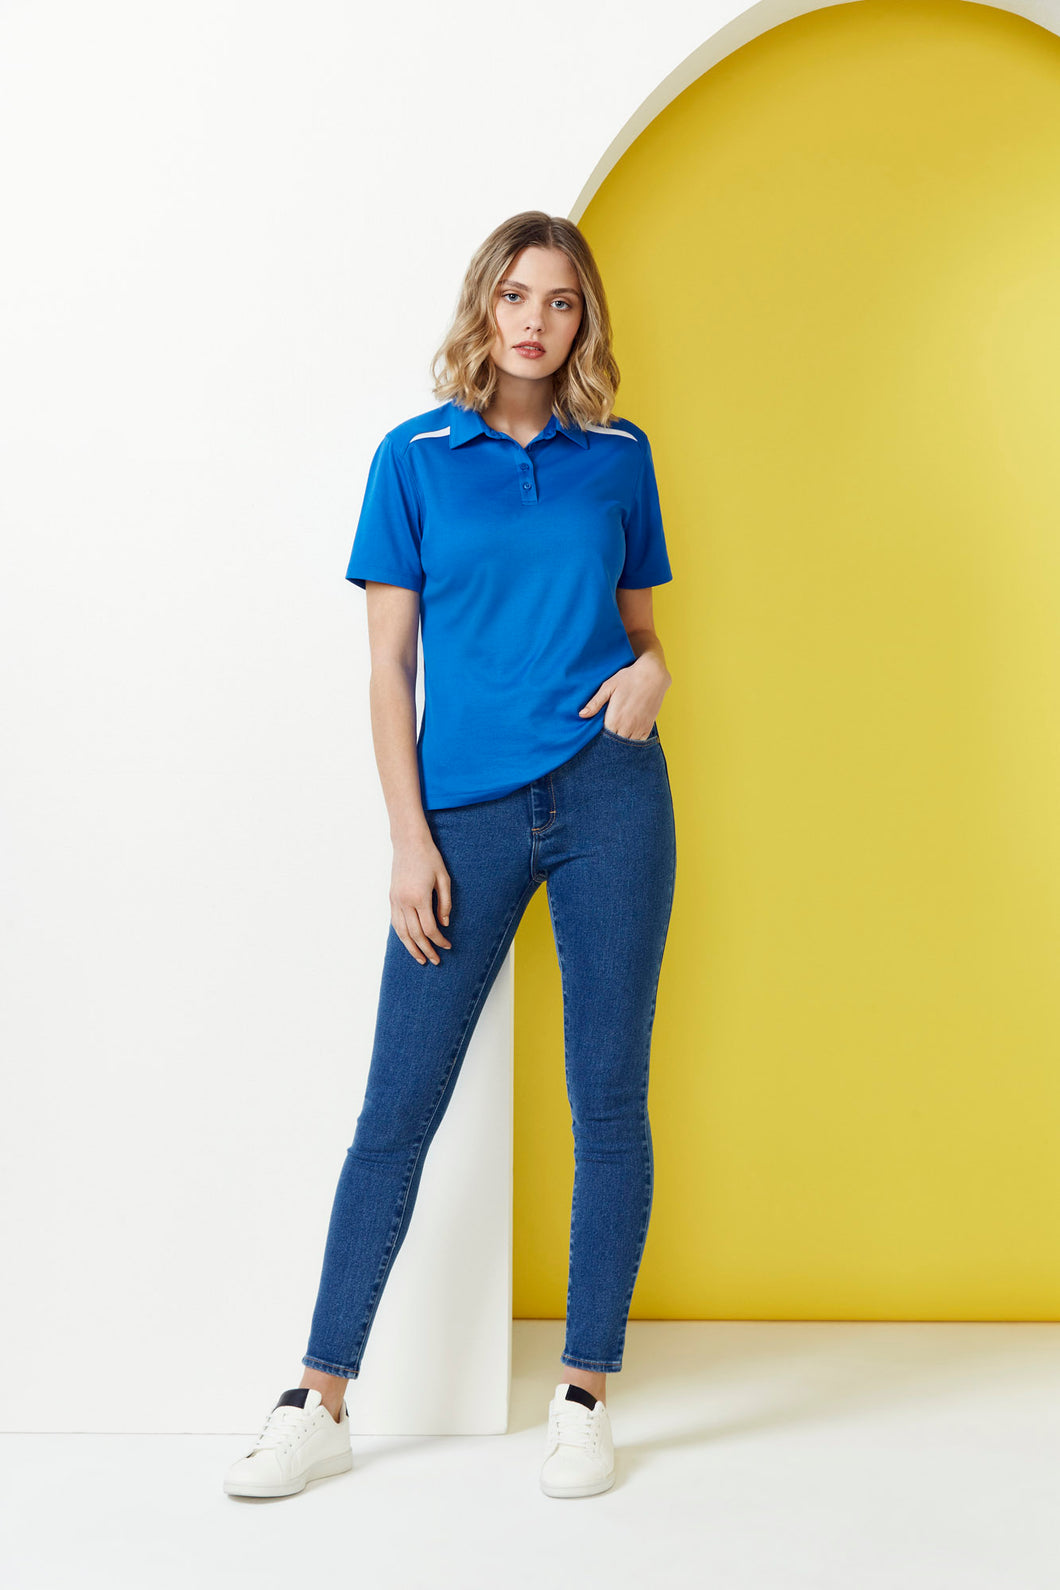 Ladies Cotton-Backed Contrast Polo - Royal/White